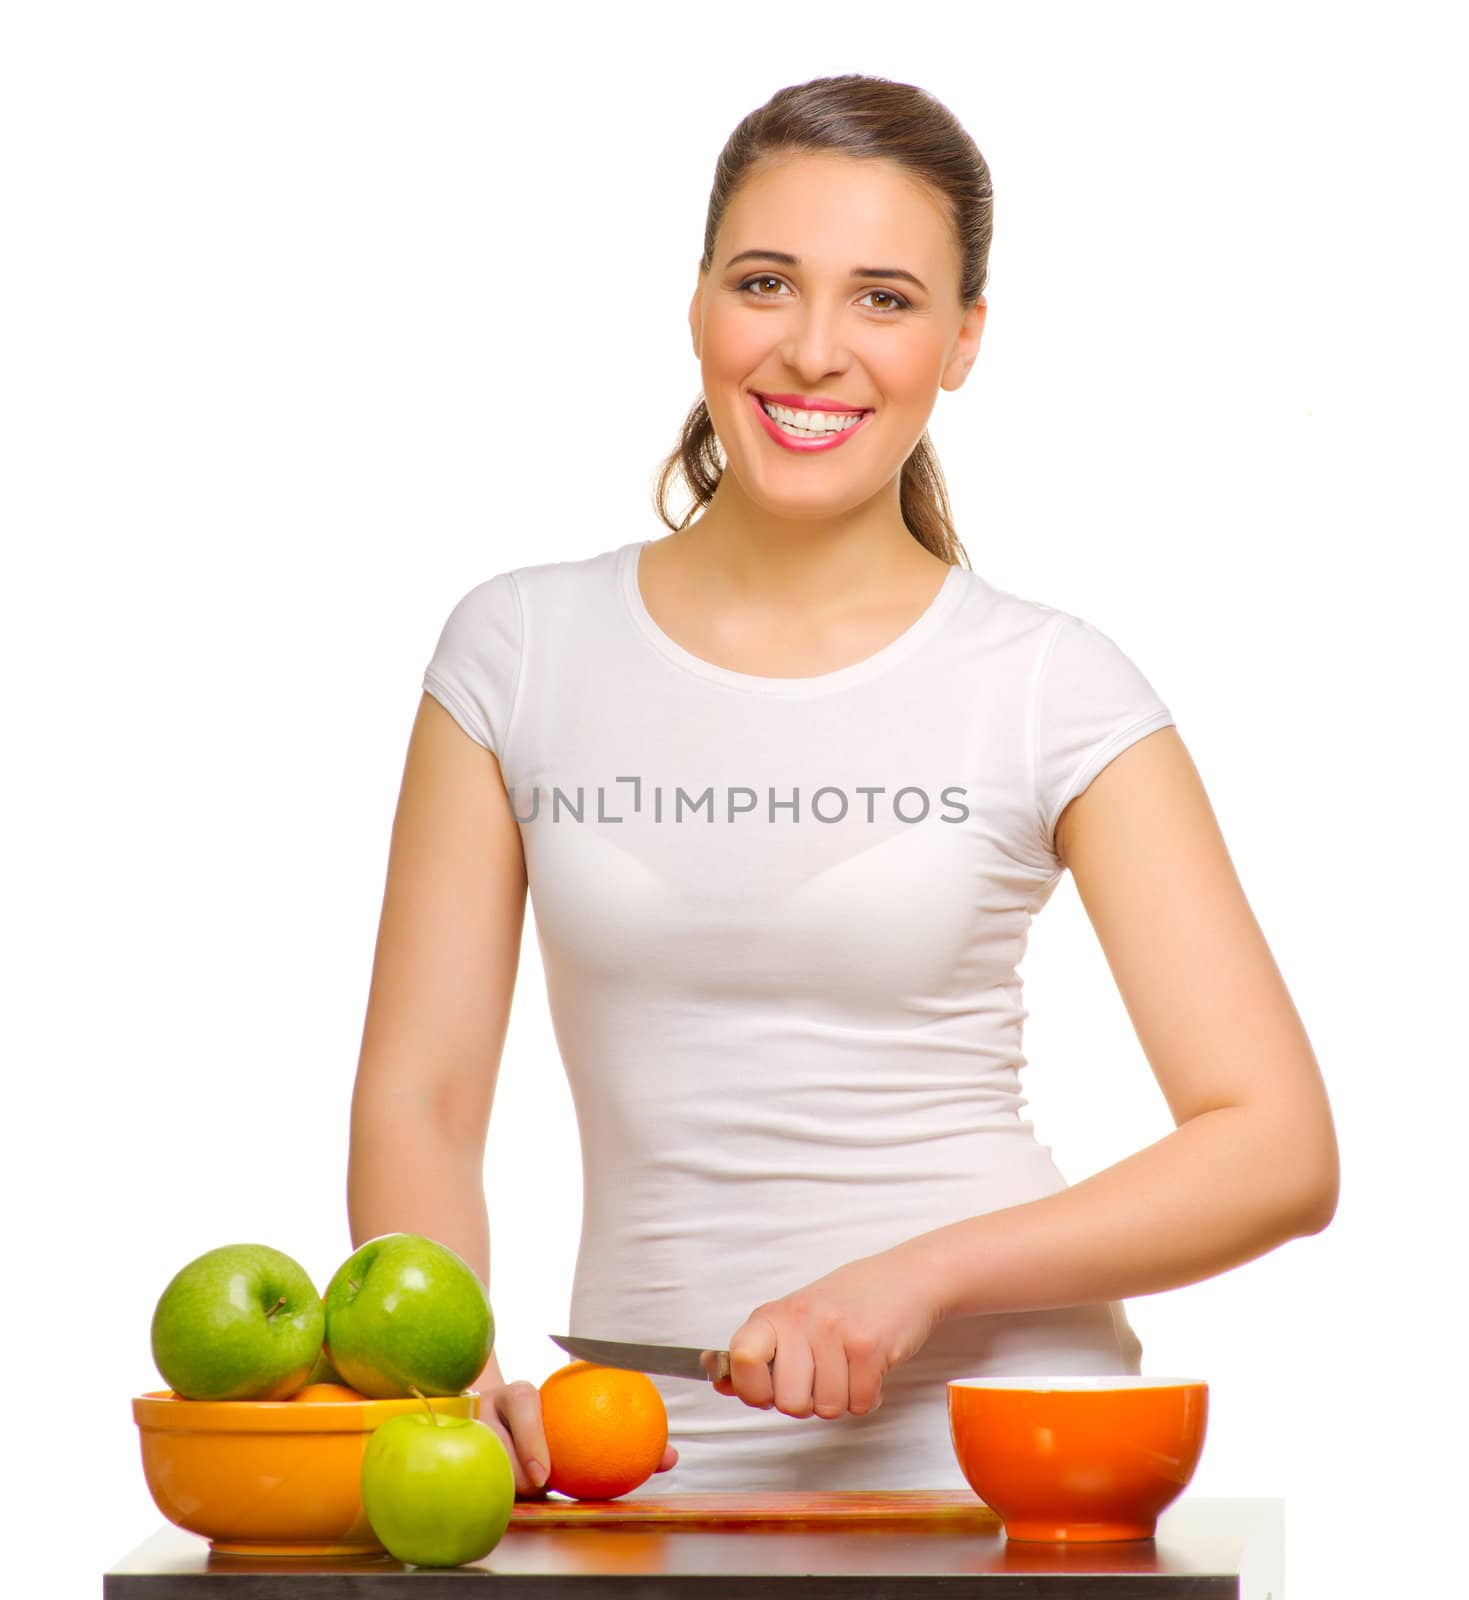 Young smiling woman with fruits isolated